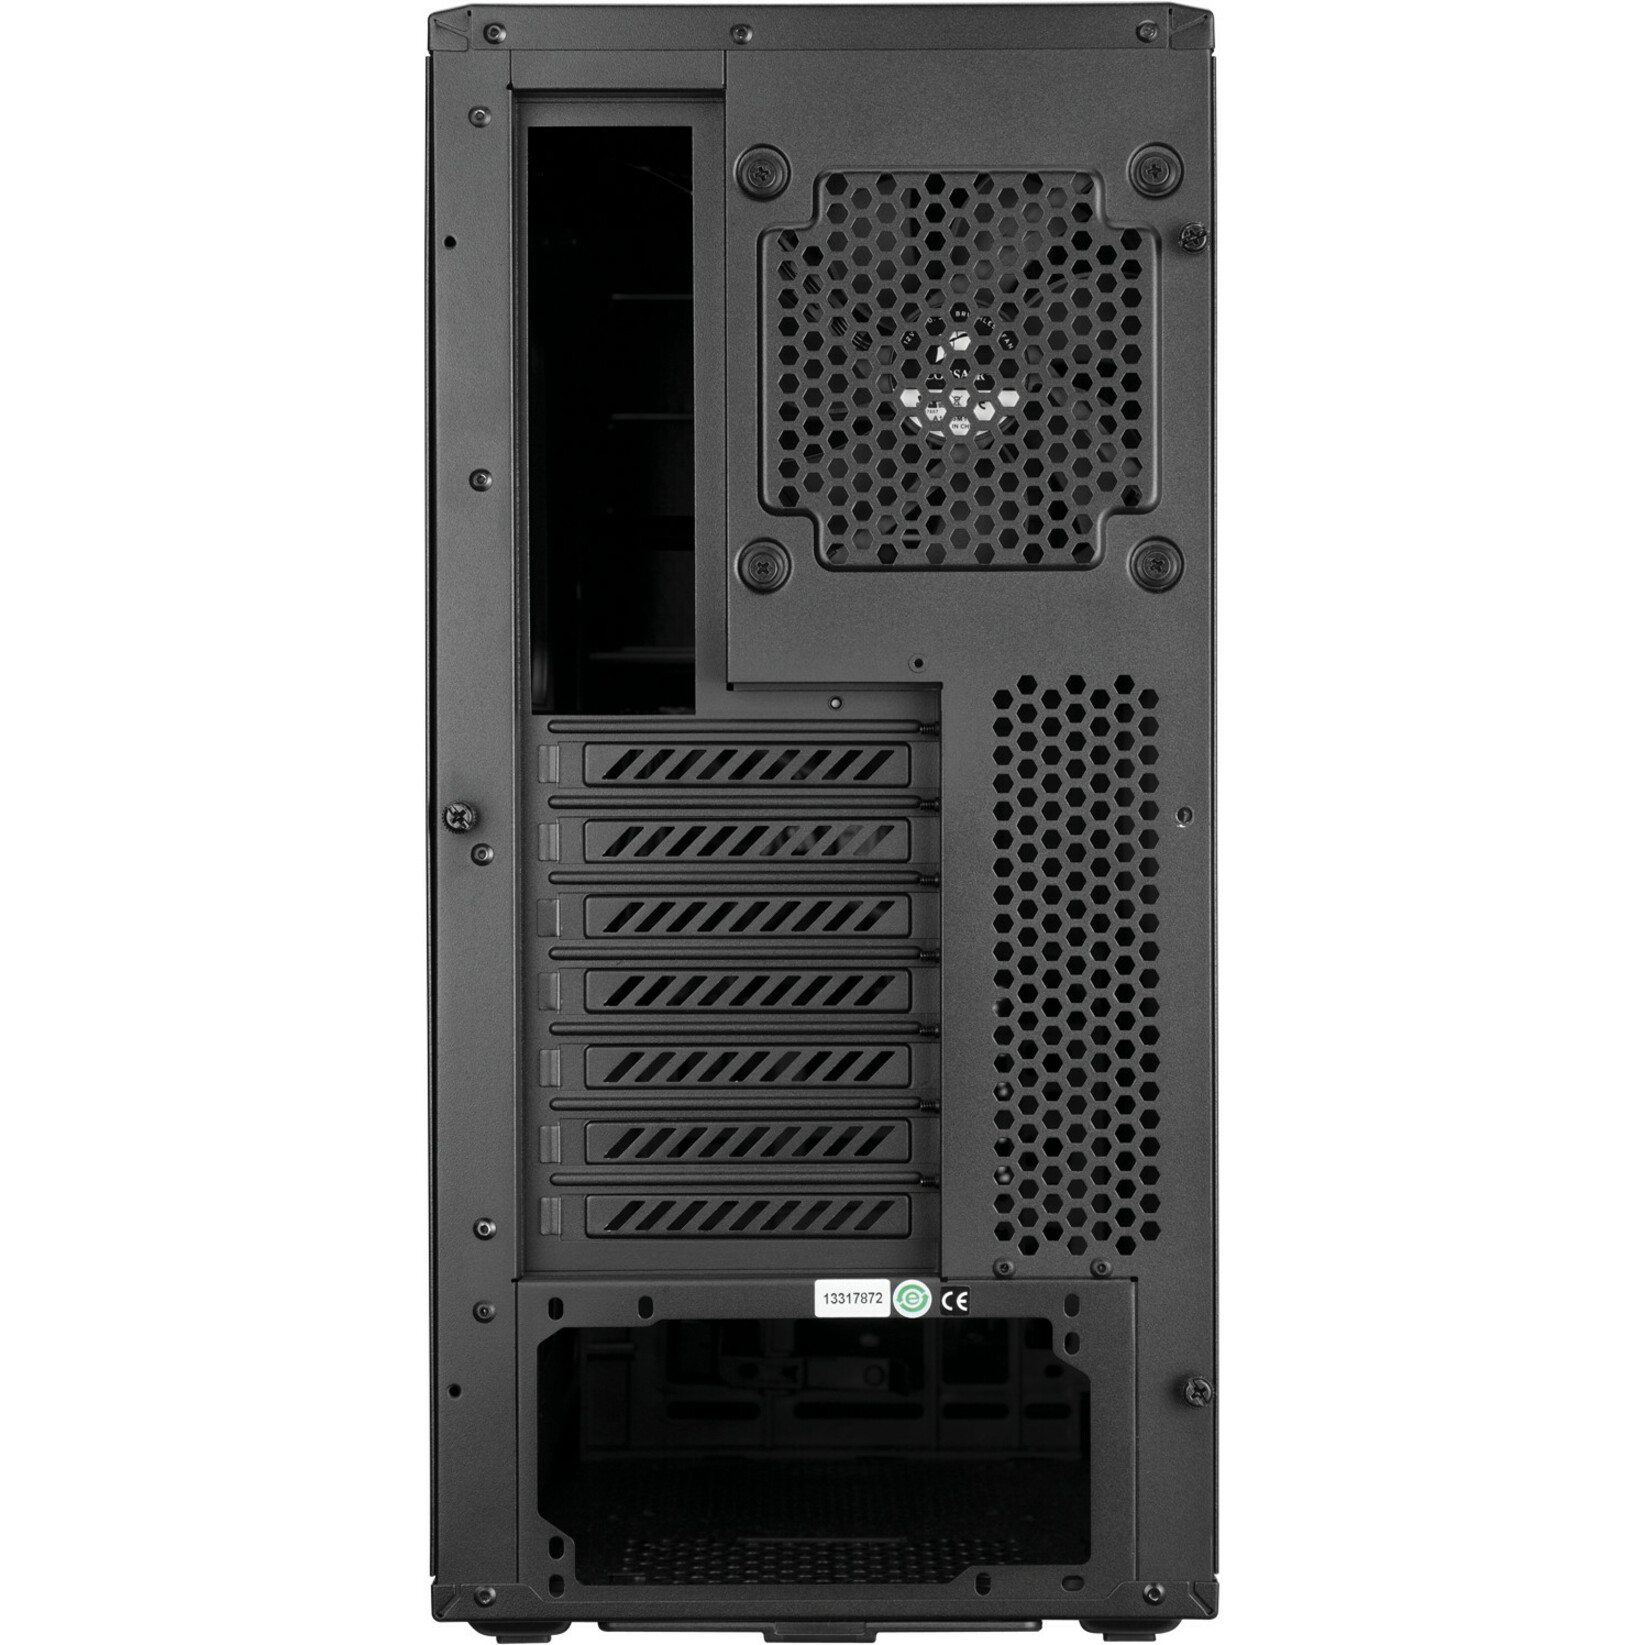 Corsair Graphite Series 230T Compact Mid Tower Case-Black - image 2 of 5